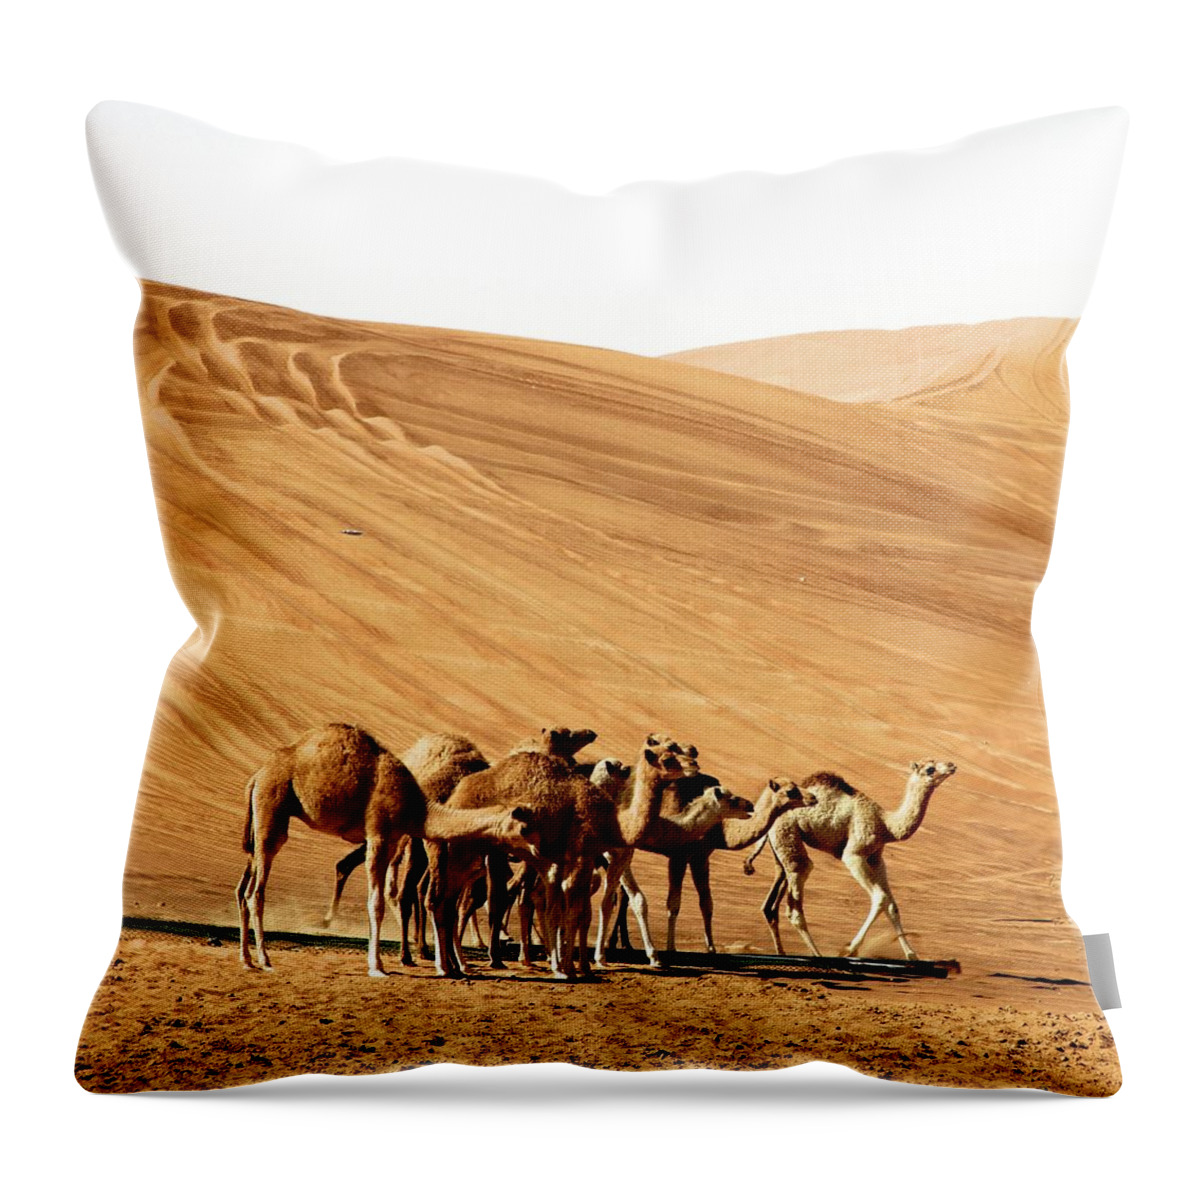 Sand Dune Throw Pillow featuring the photograph Camel Meeting In Desert by Stefano Gambassi